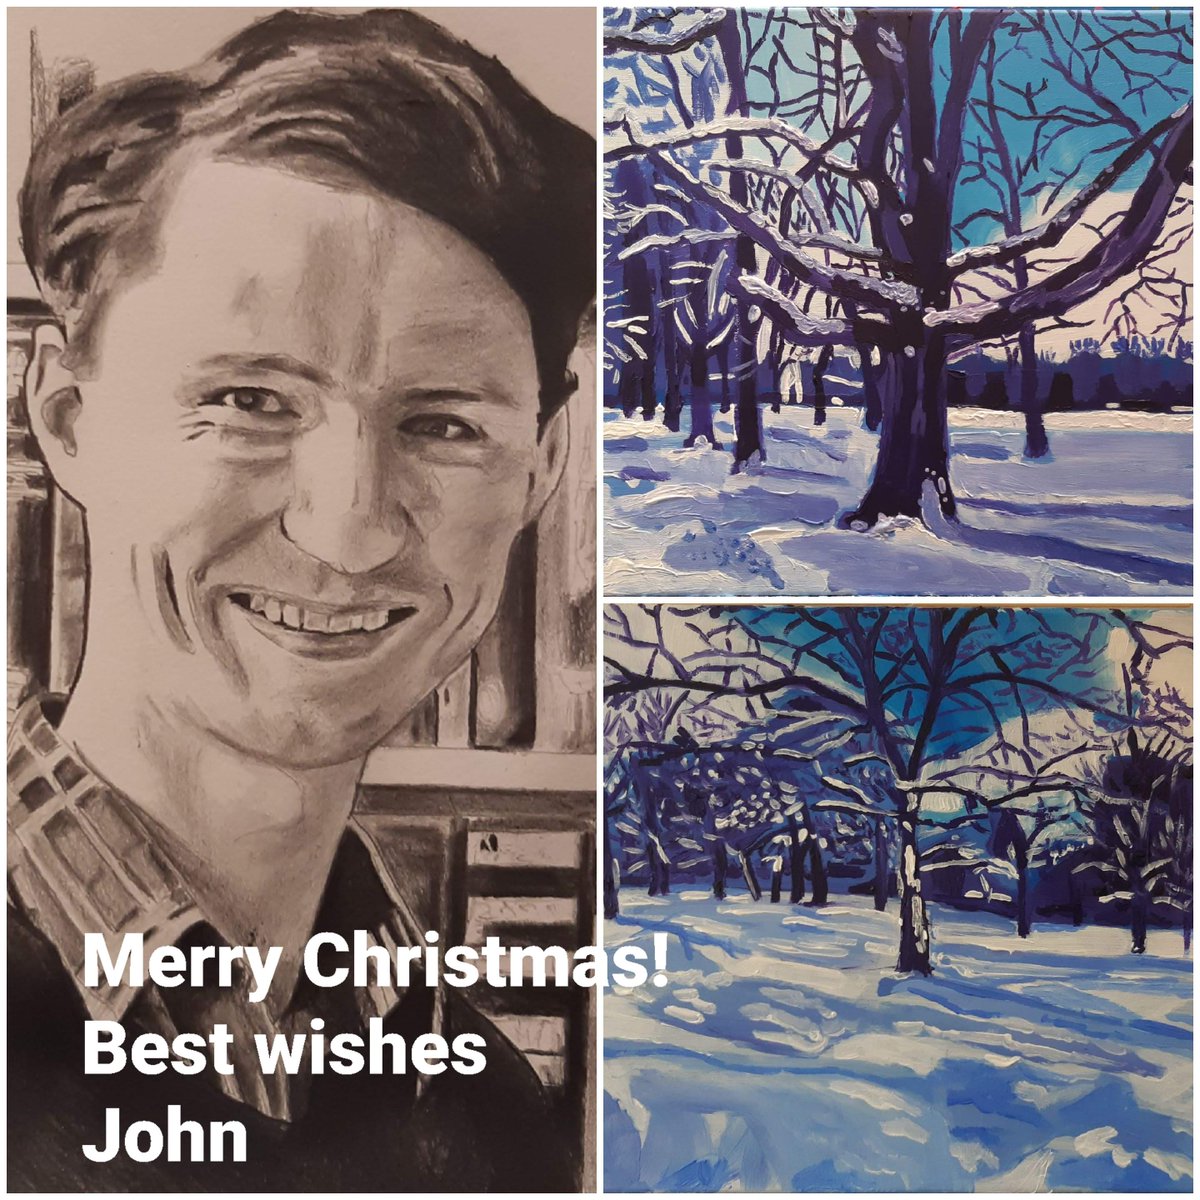 Wishing ALL of my followers a Merry Christmas. Thank you for your support this year 😀

#art #artist #portrait #portraitart #pencilportrait #pencildrawing #drawing #painting #acrylicpainting #snowpainting #snowscapepainting #snow #winter #trees #MerryChristmas #DalerRowney